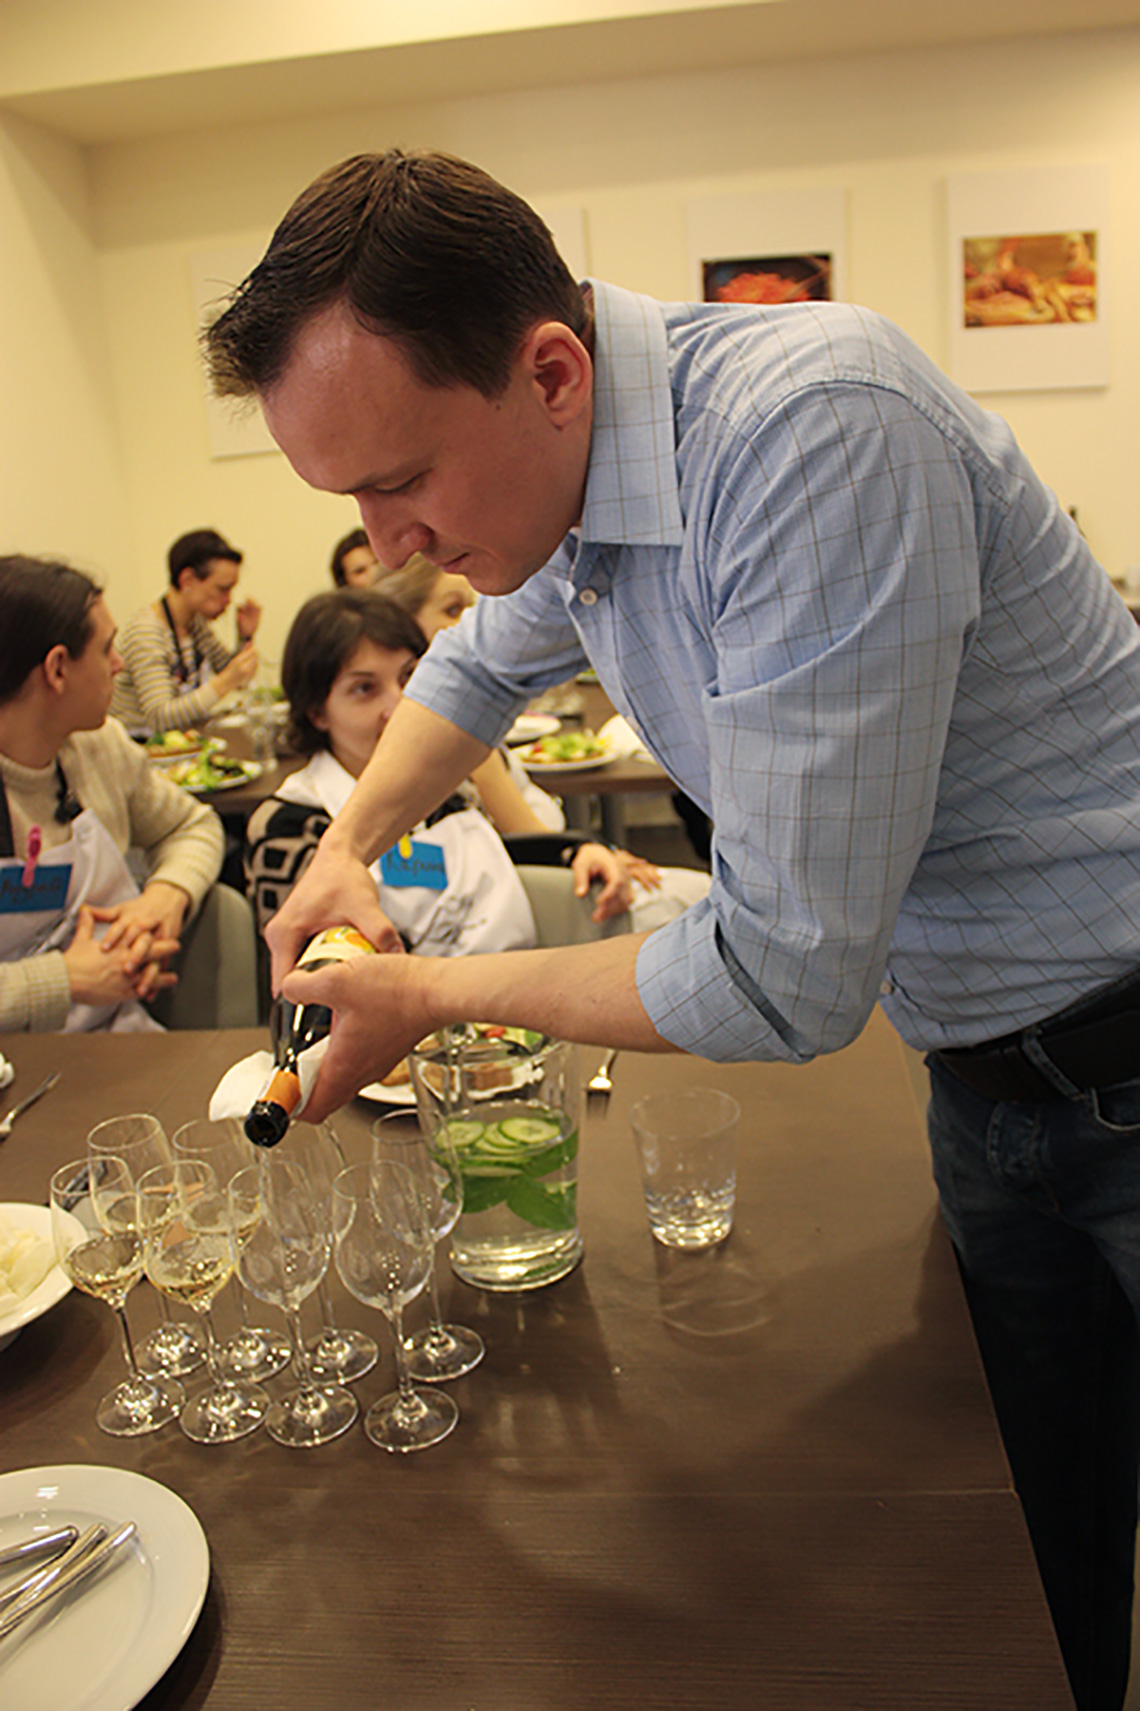 Sommelier. Course "Culinary Traditions of Northern Italy". Cooking school in Ukraine.